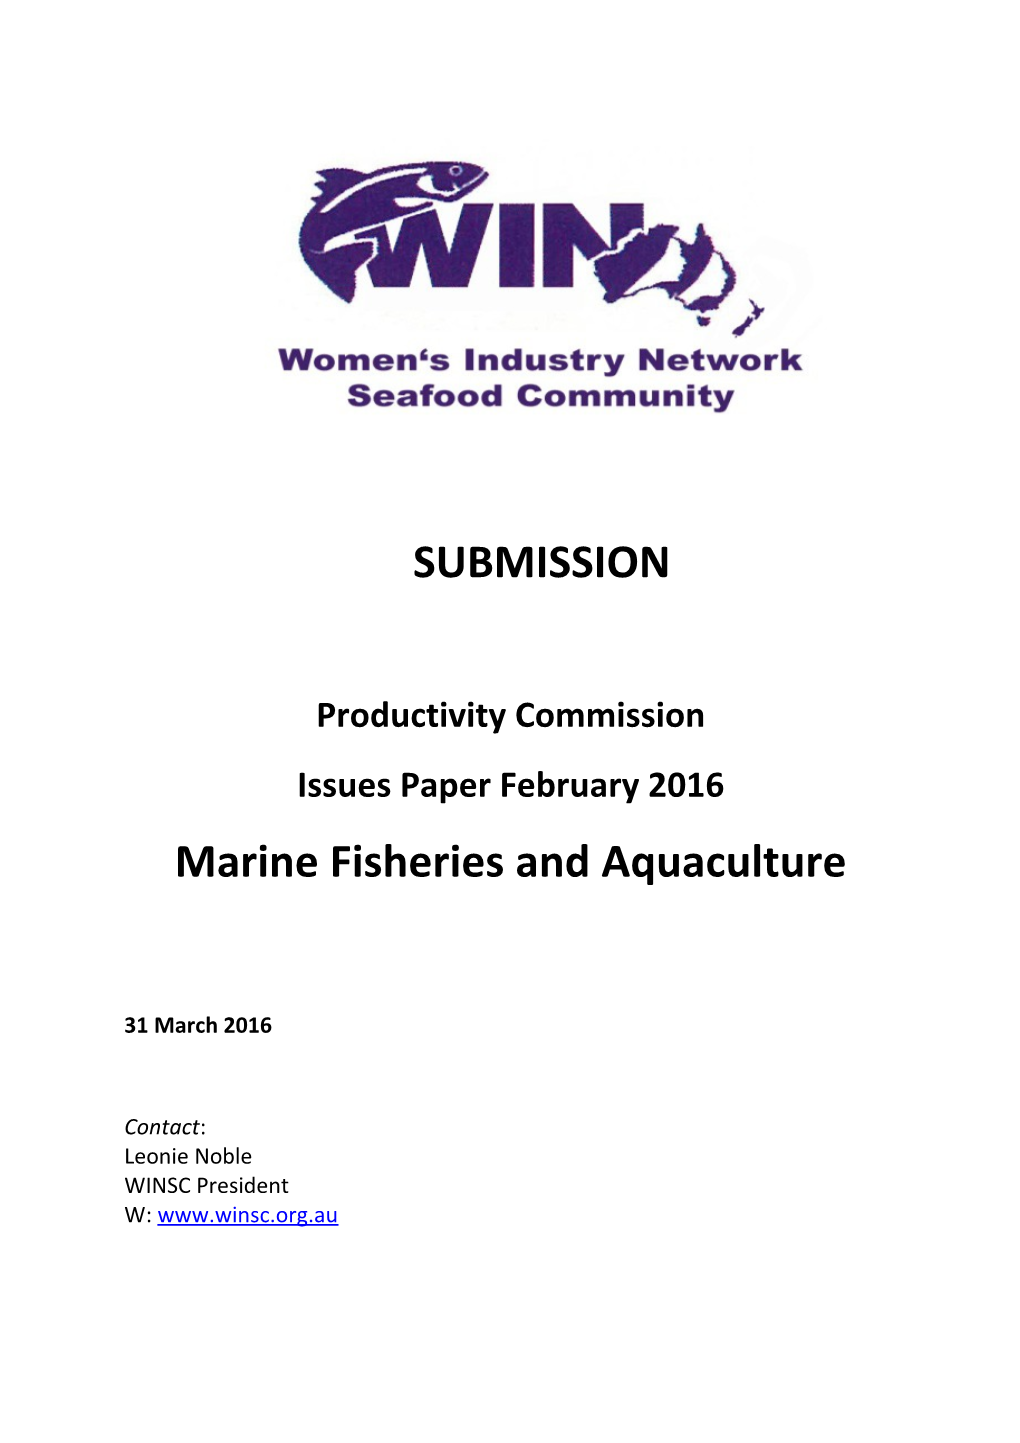 Submission 12 - Women's Industry Network Seafood Community - Marine Fsiheries and Aquaculture